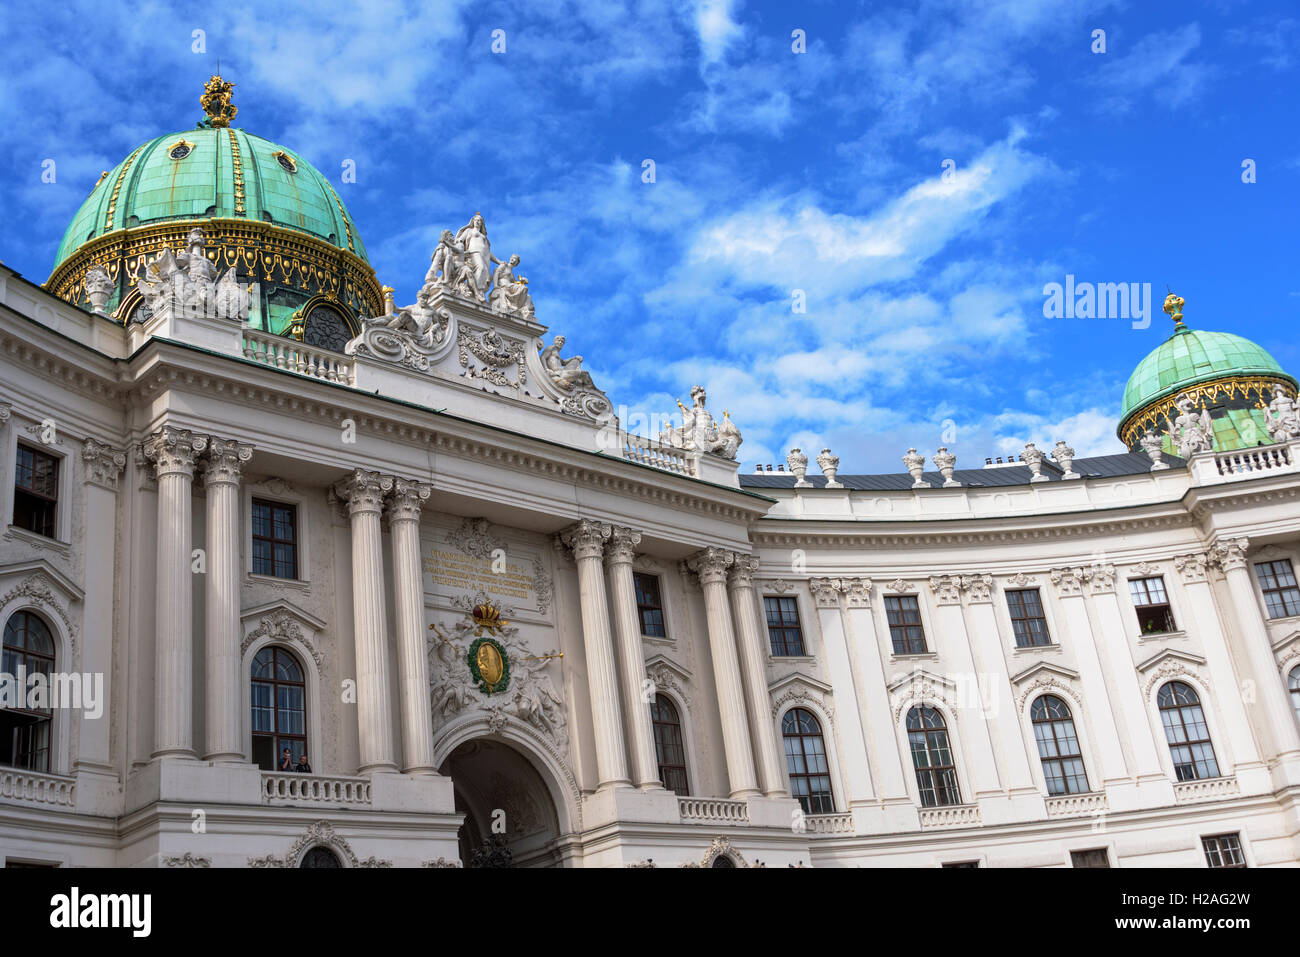 St. Michael's Gate to the Hofburg Palace and St. Michael's Church. Stock Photo